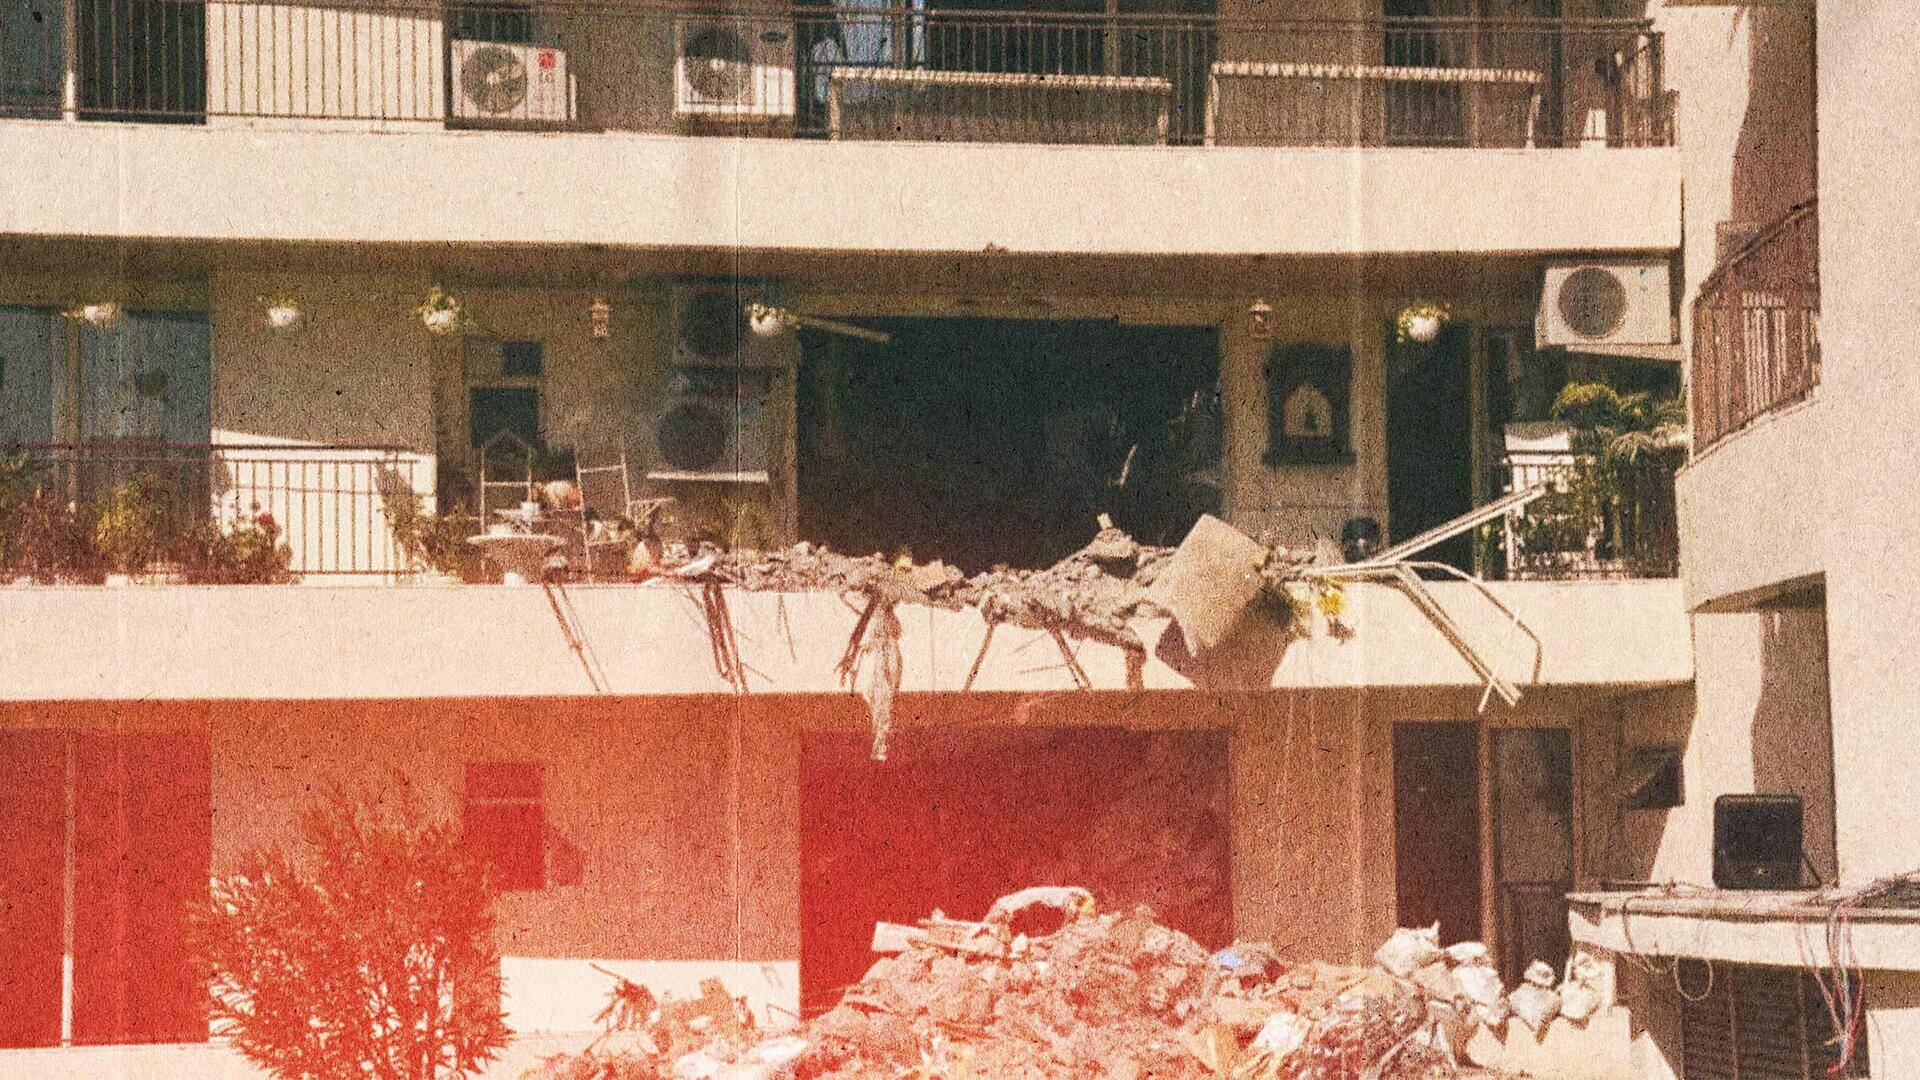 Balconies at Gurugram's Chintels housing complex collapse, raises safety concerns